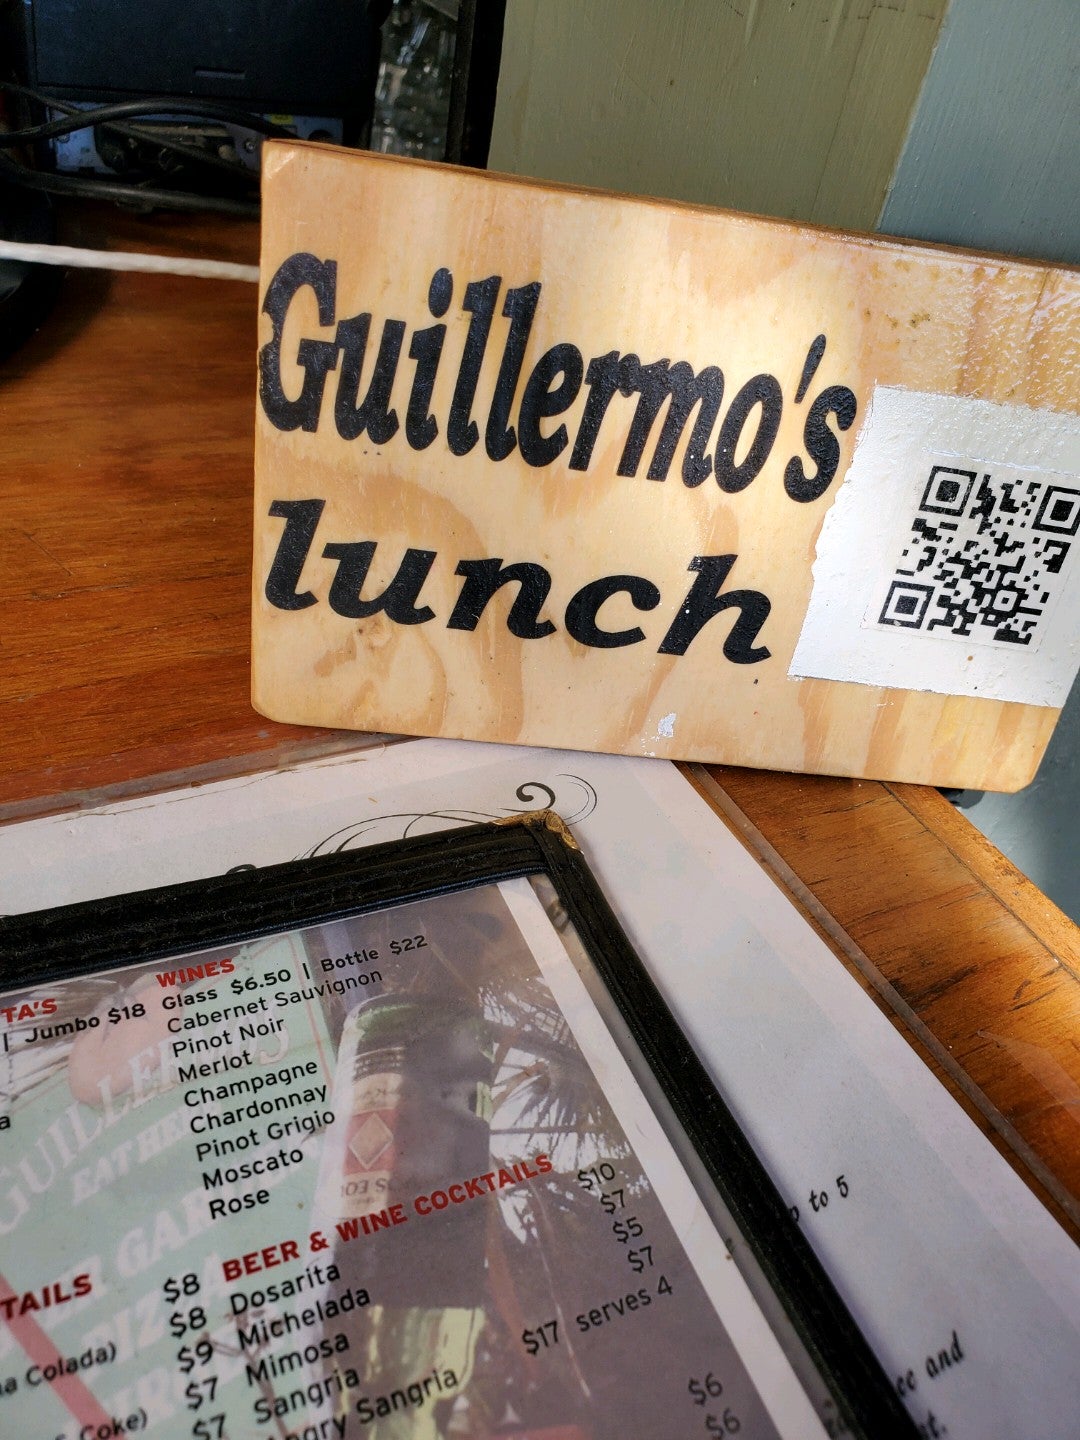 Guillermo's